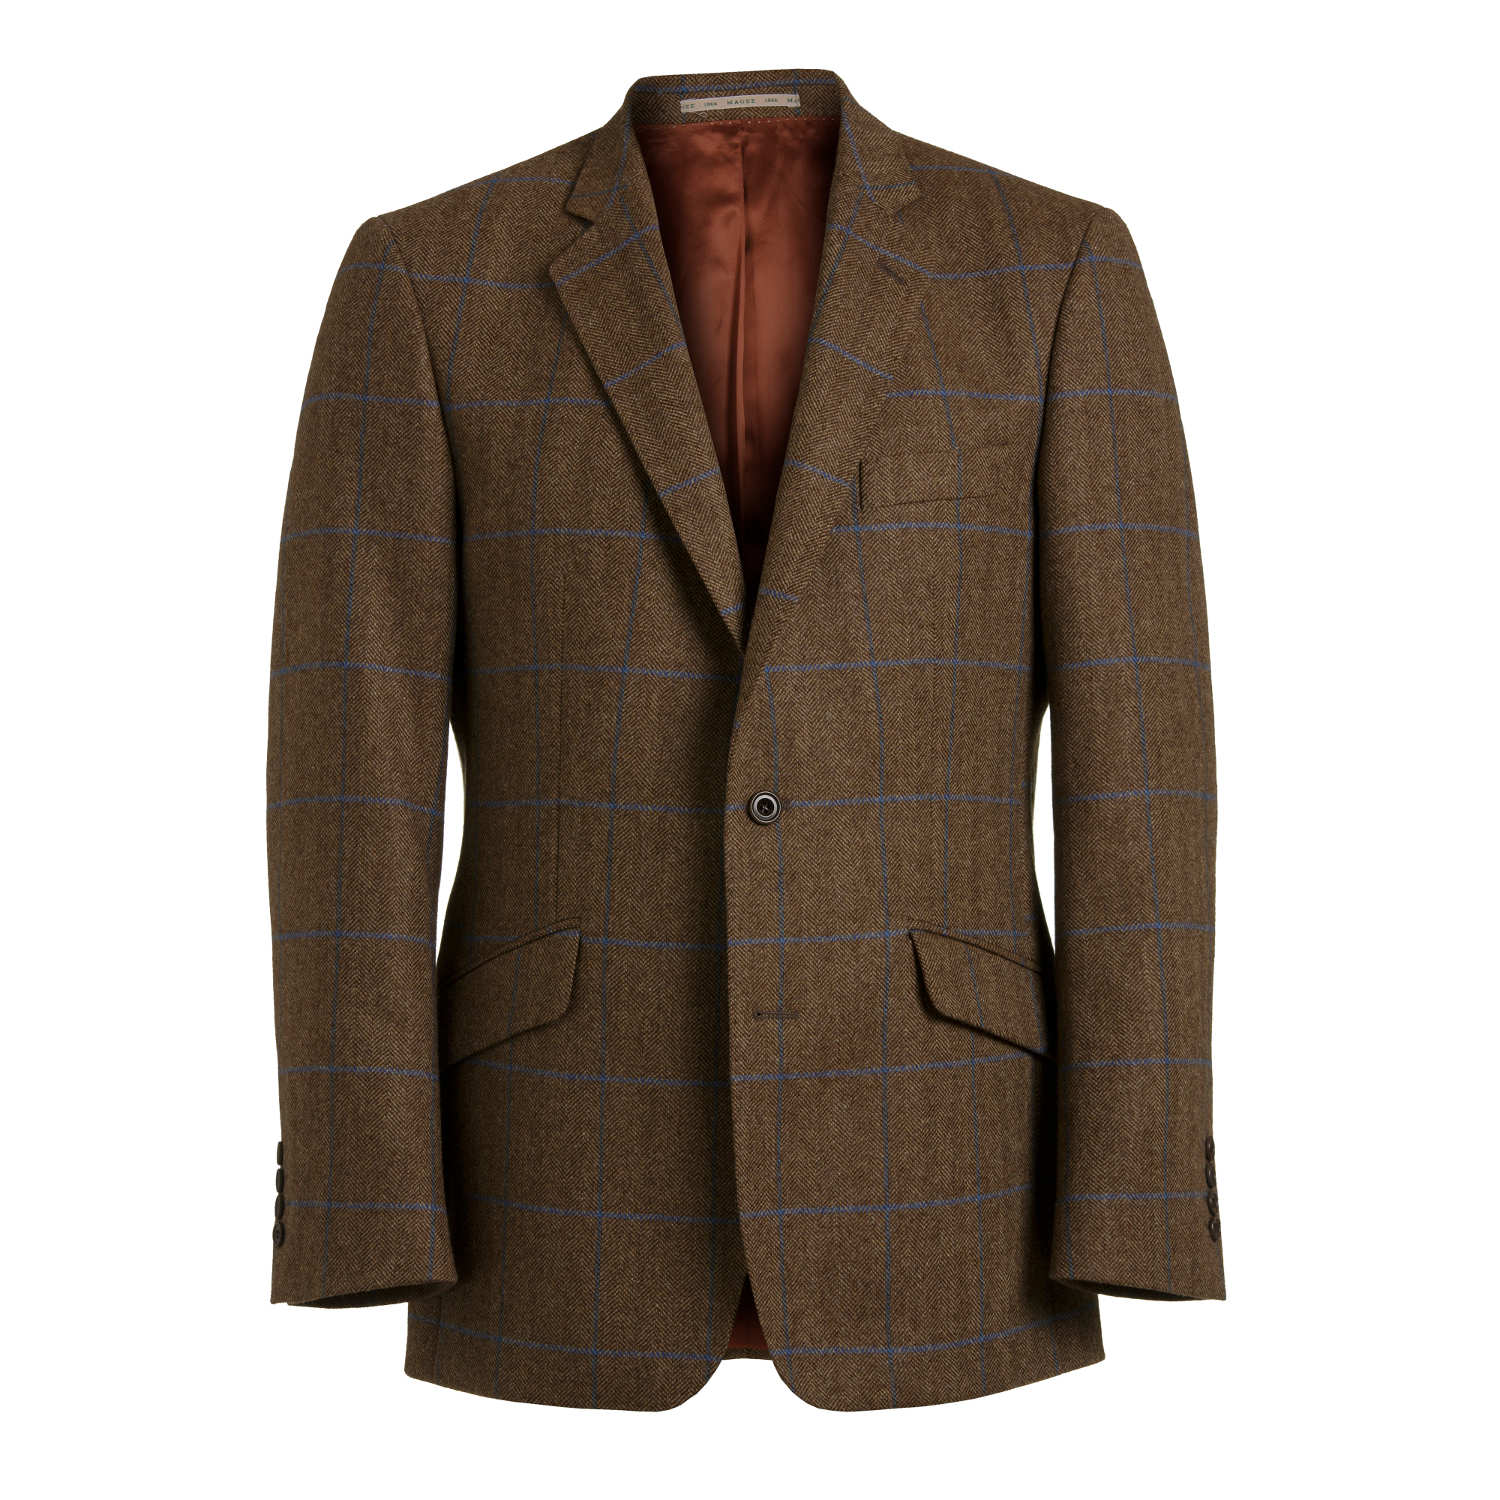 Earthy Brown with blue box pattern - Tom Murphy's Formal and Menswear